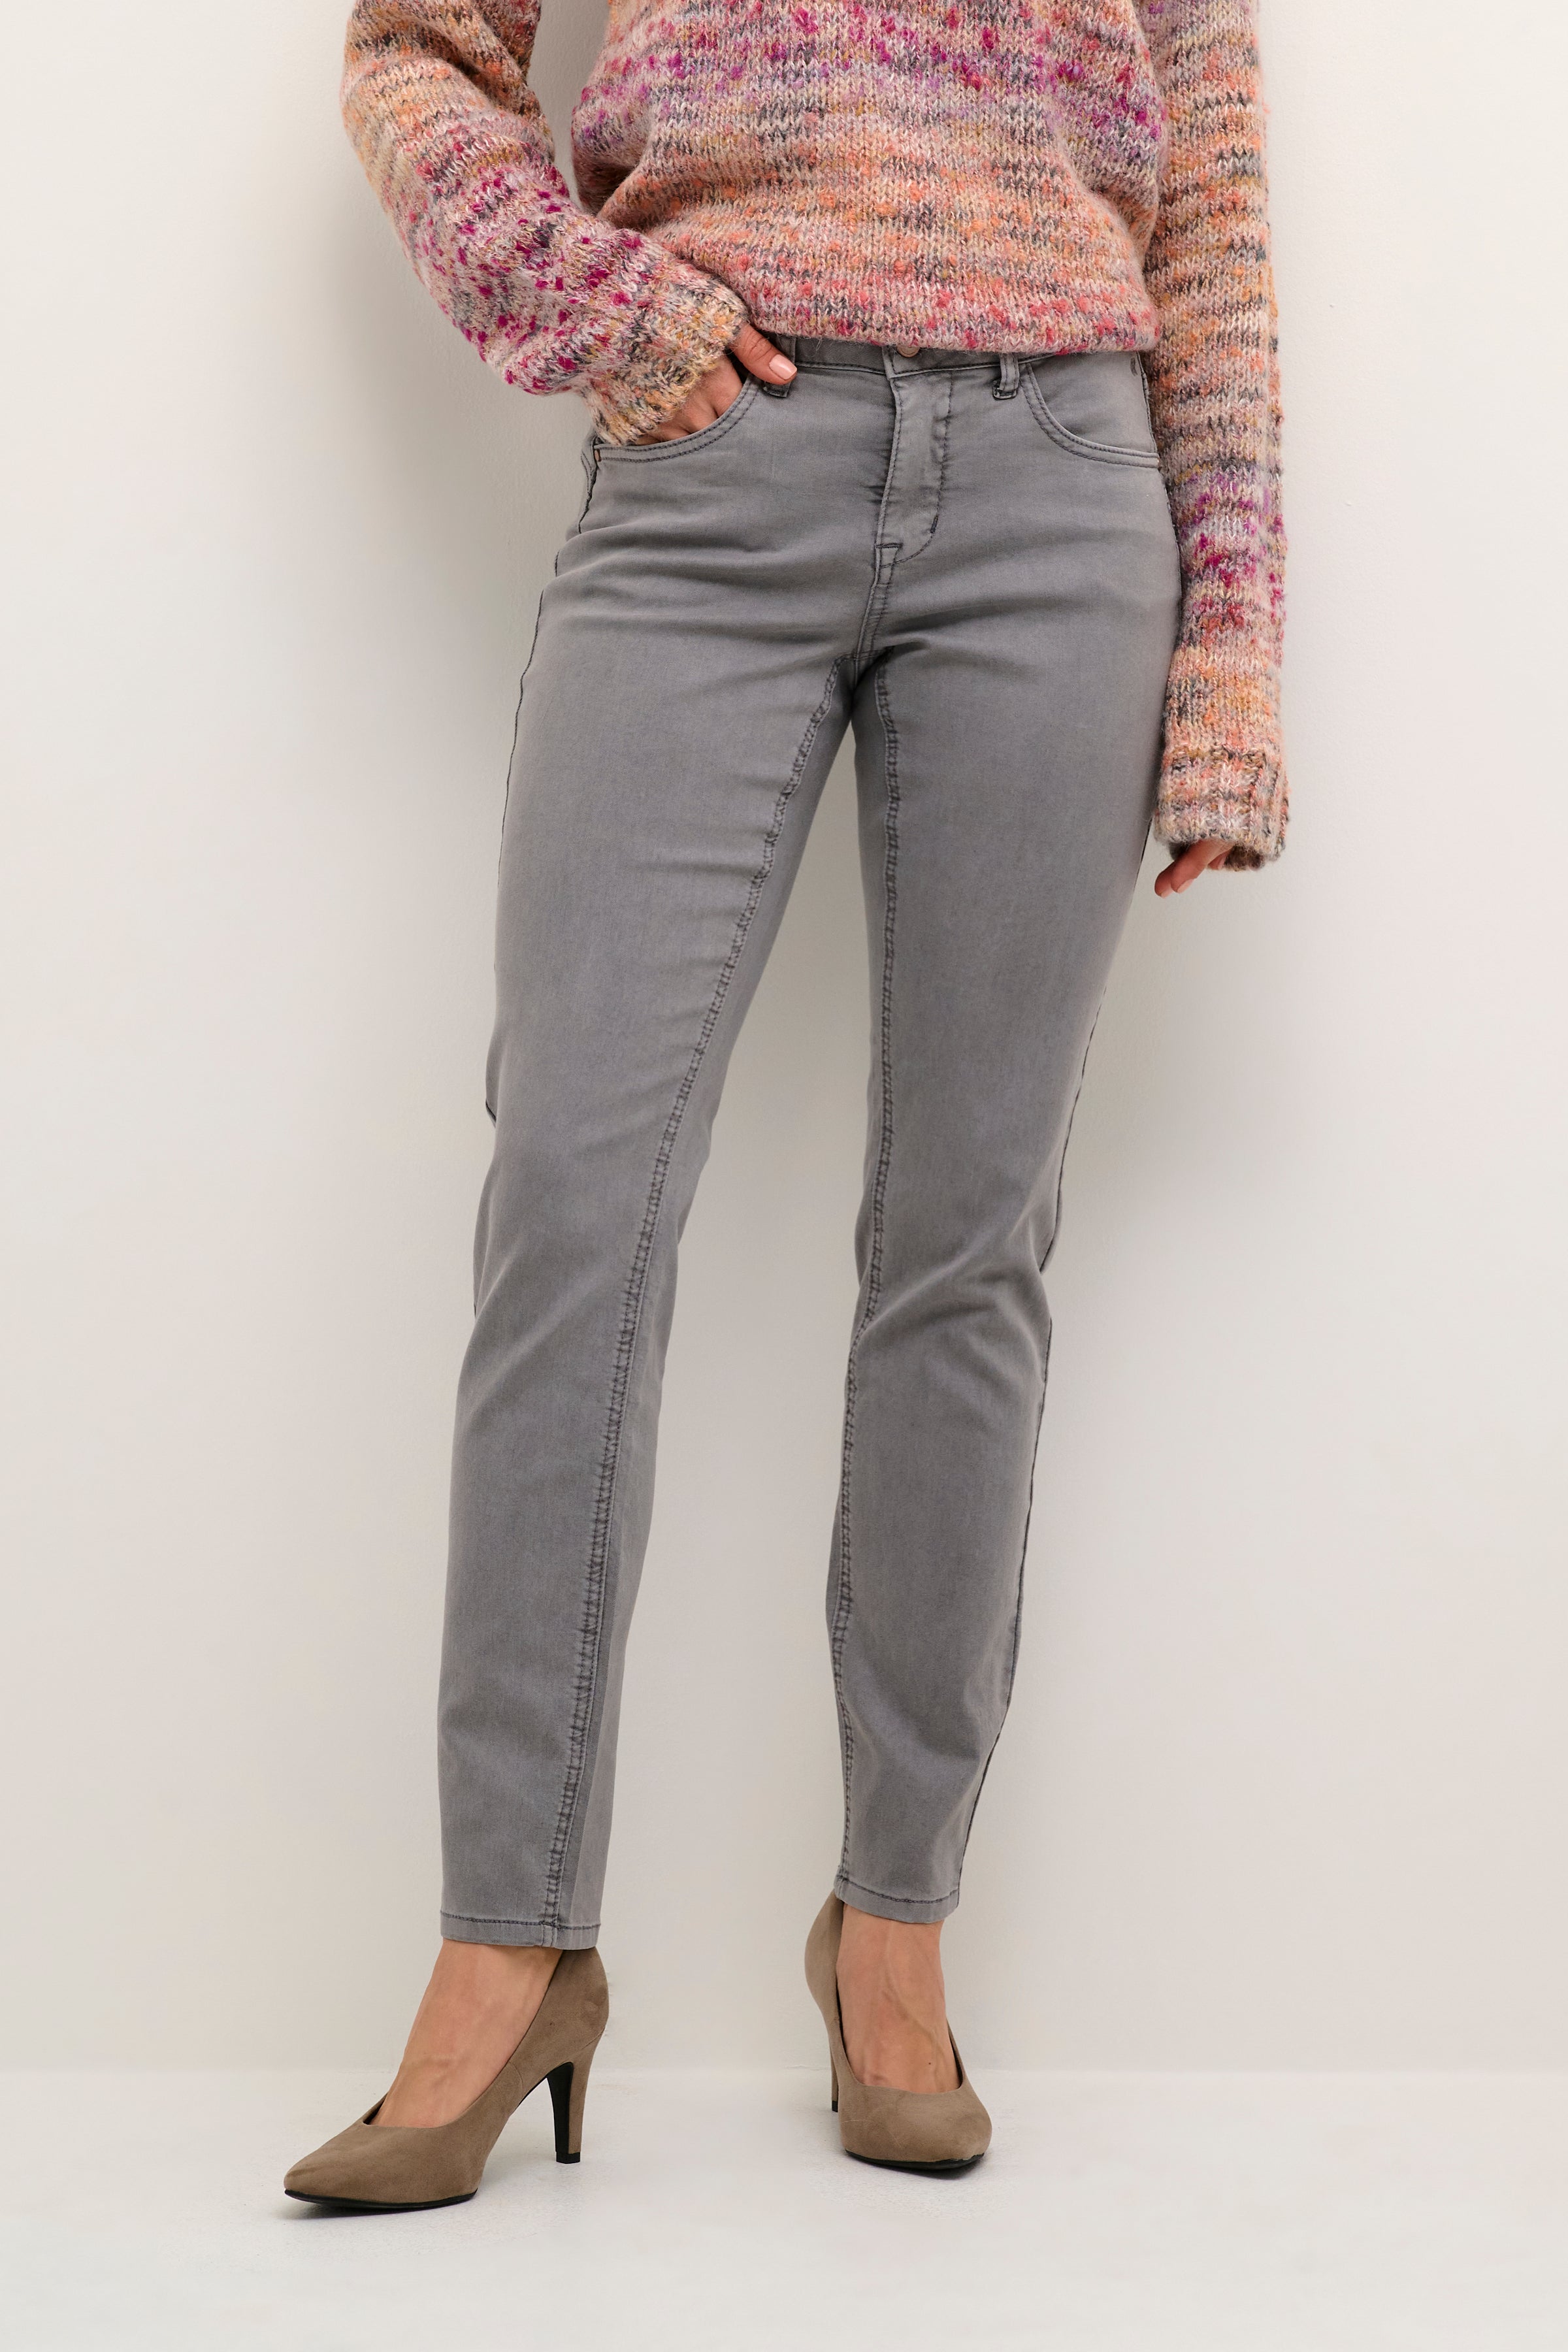 These Cream Lotte Plain Twill Jeans in a Coco Fit will take your outfit game to the next level. 